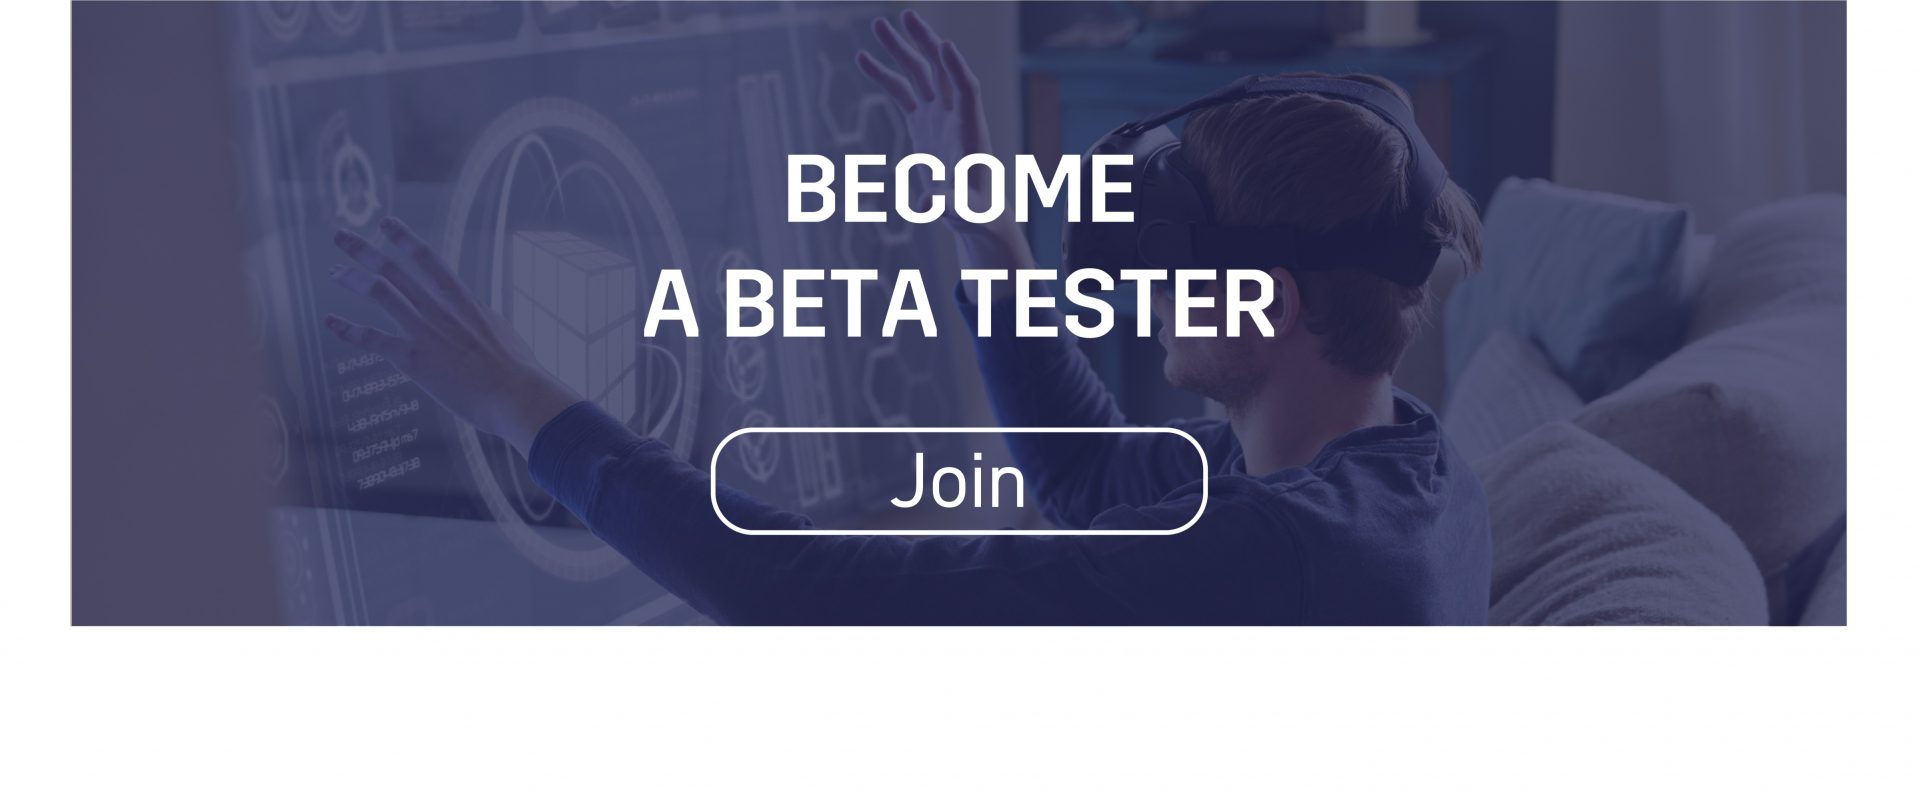 Become a beta tester of the Haptic Composer 2.0 and help us provide you the best product for haptic design.